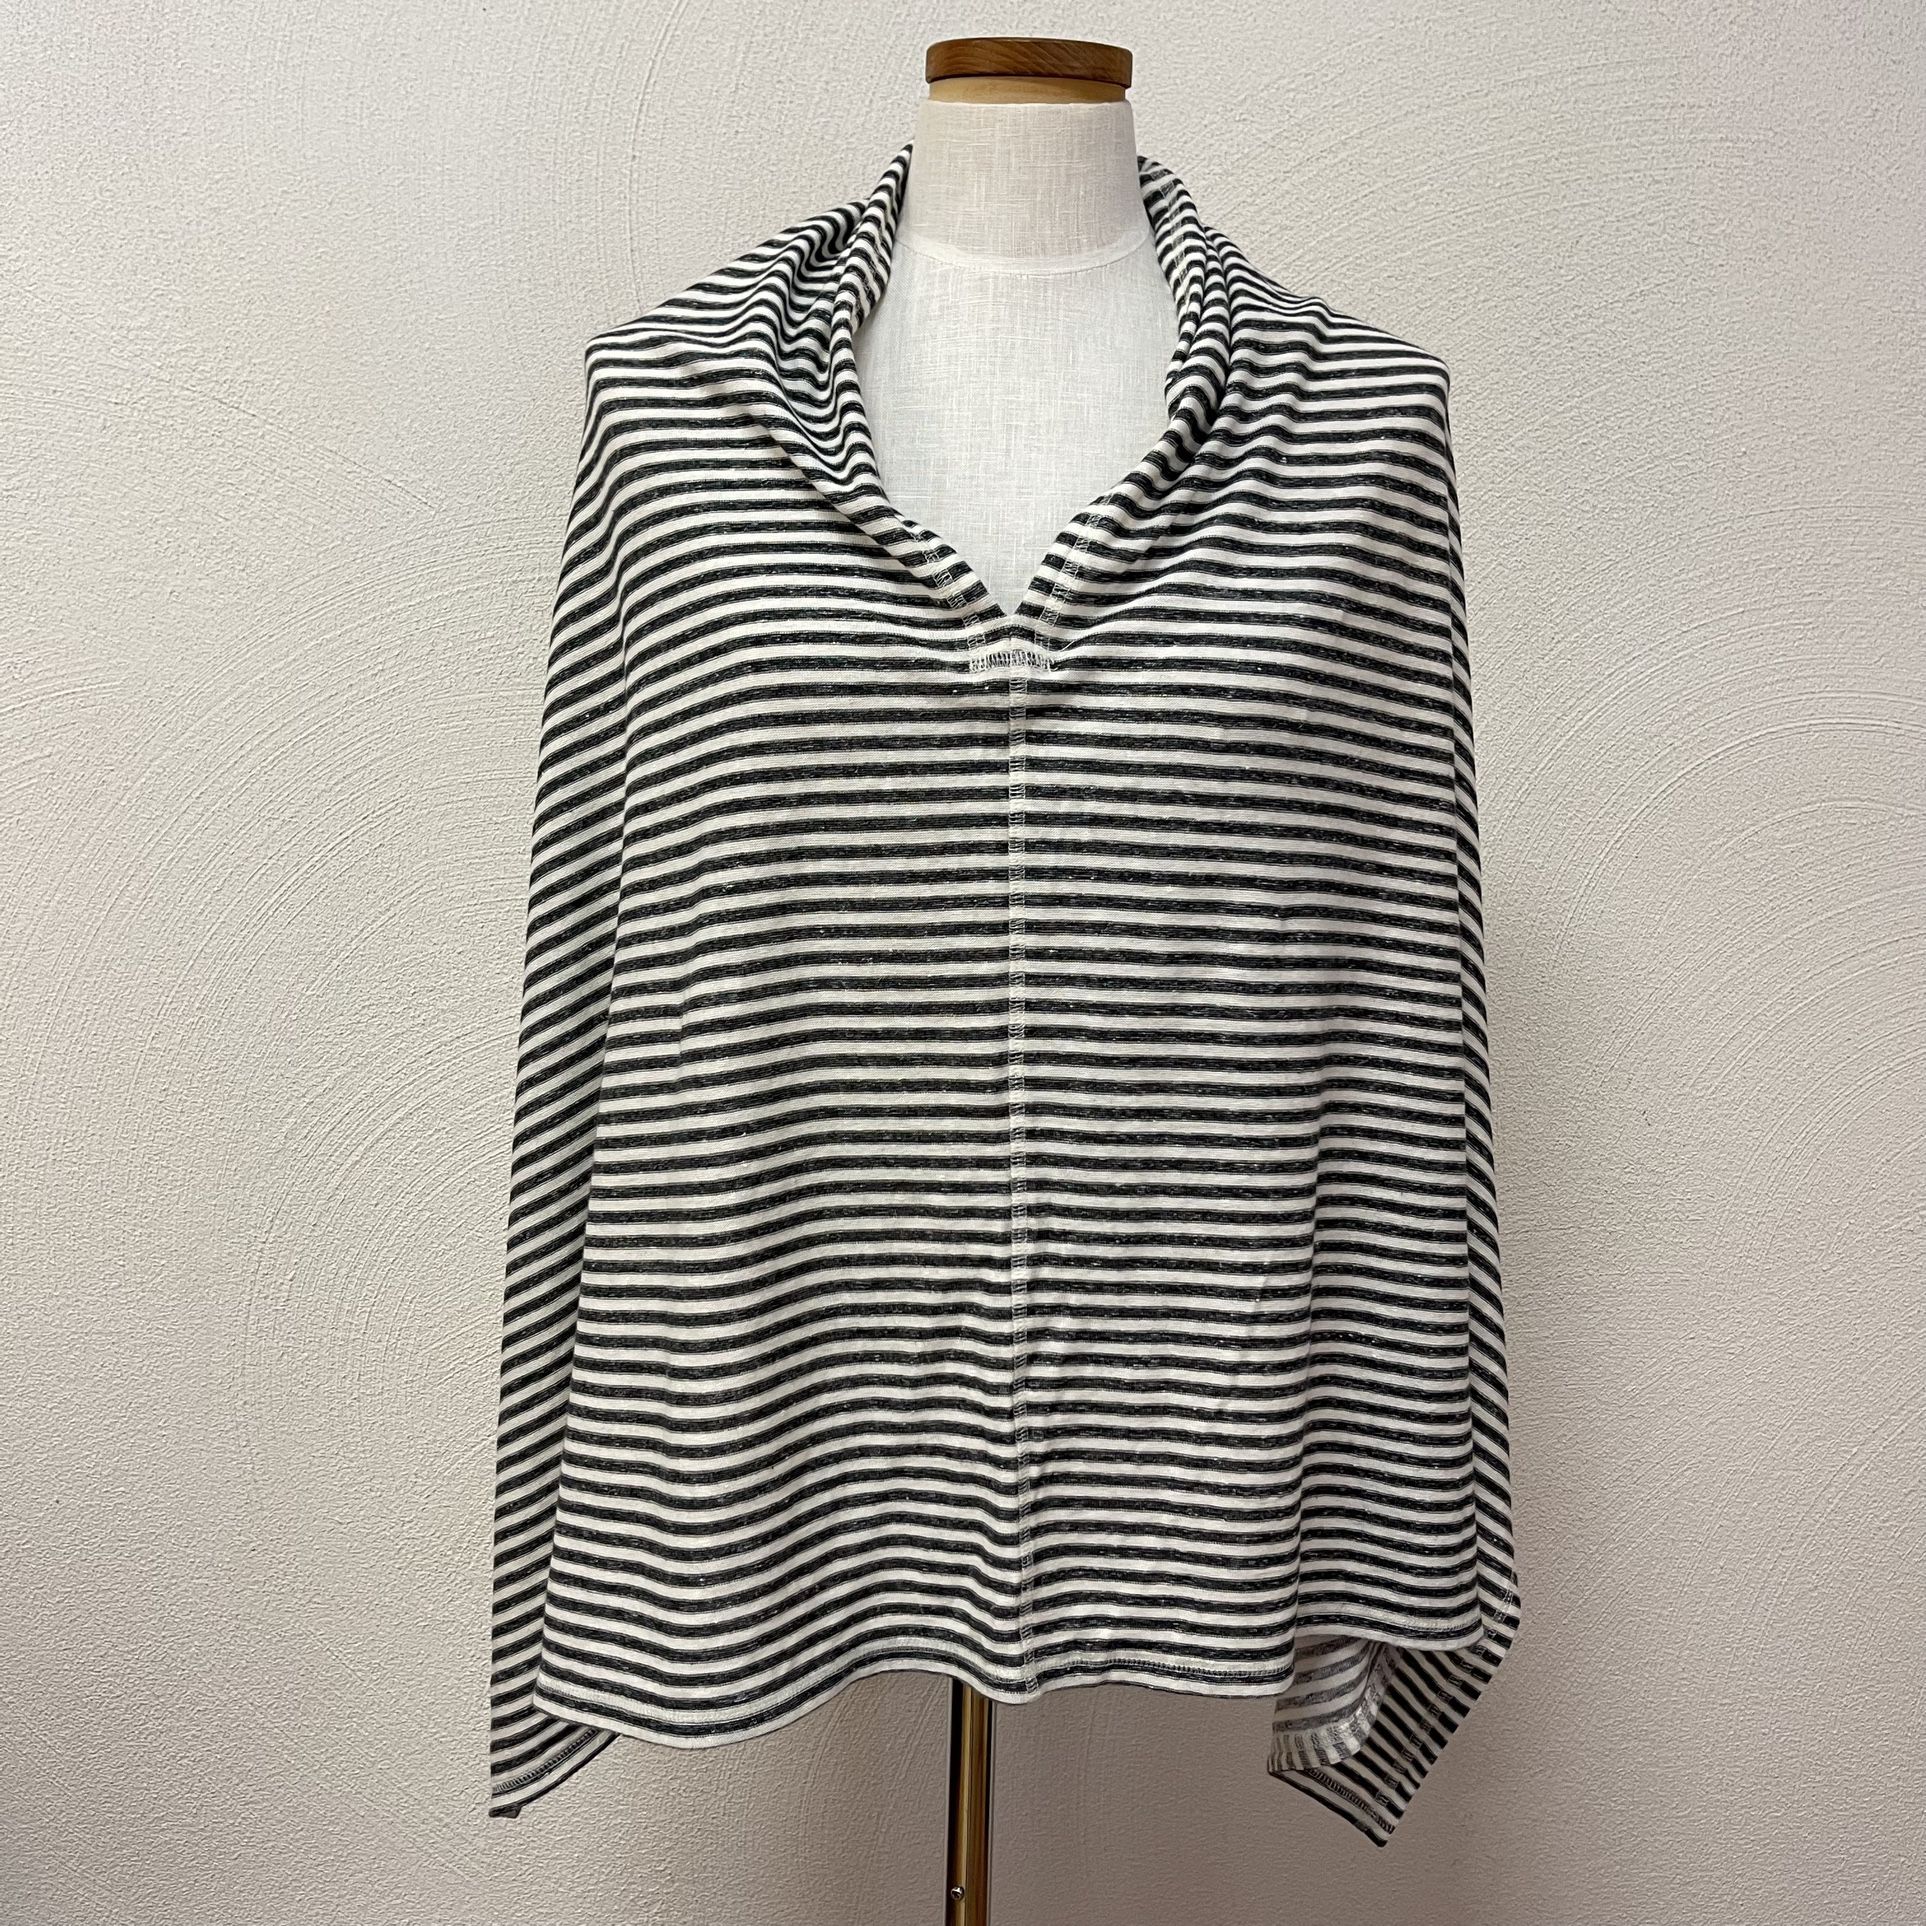 NWOT Eileen Fisher Gray & White Striped Poncho Sweater Boxy Top Linen Blend OS  Super cute top in brand new condition!  No stains or snags. Freshly st